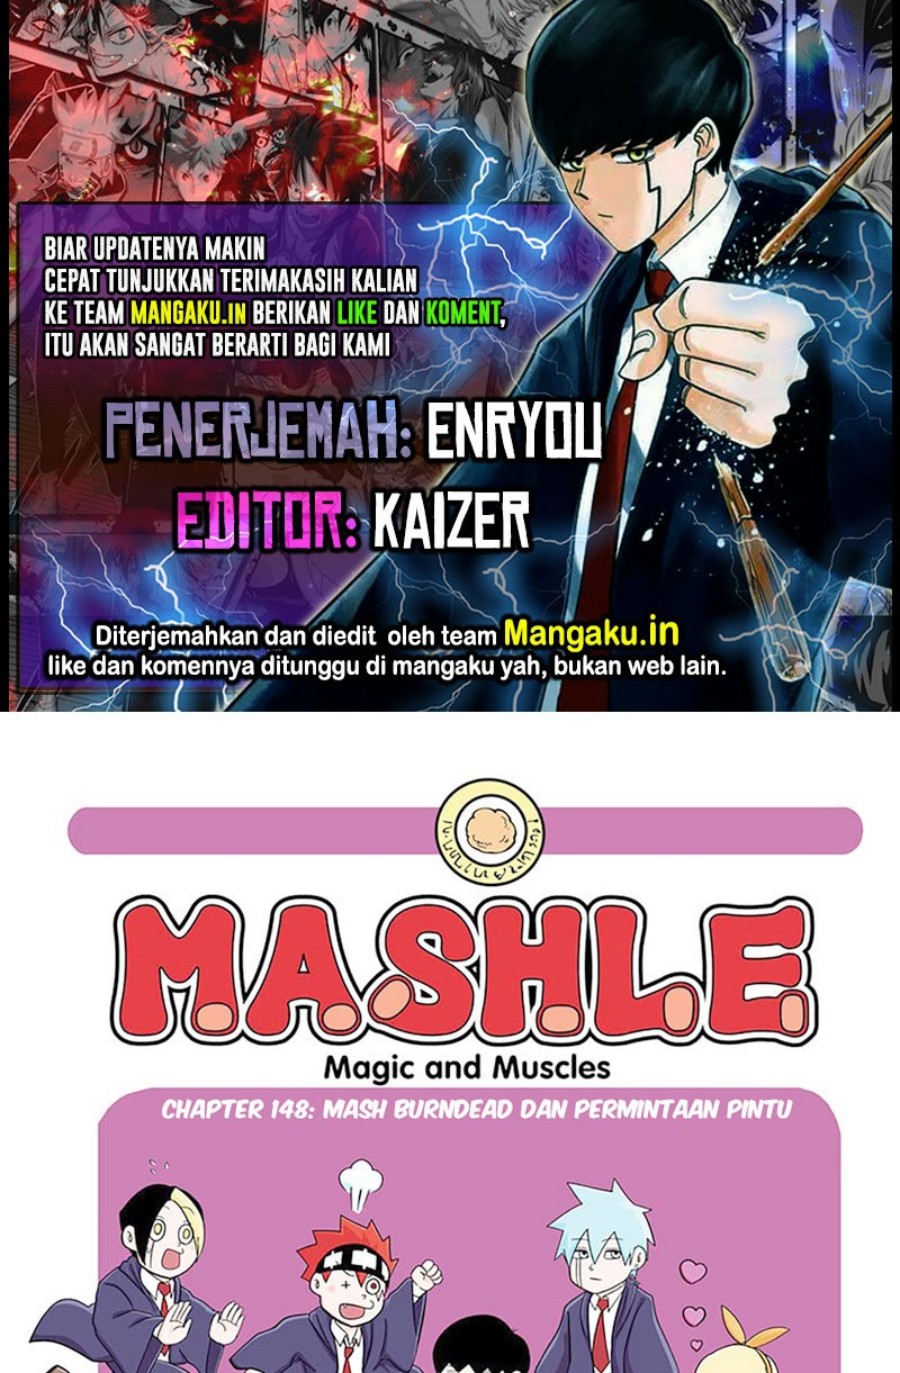 Mashle: Magic and Muscles Chapter 148